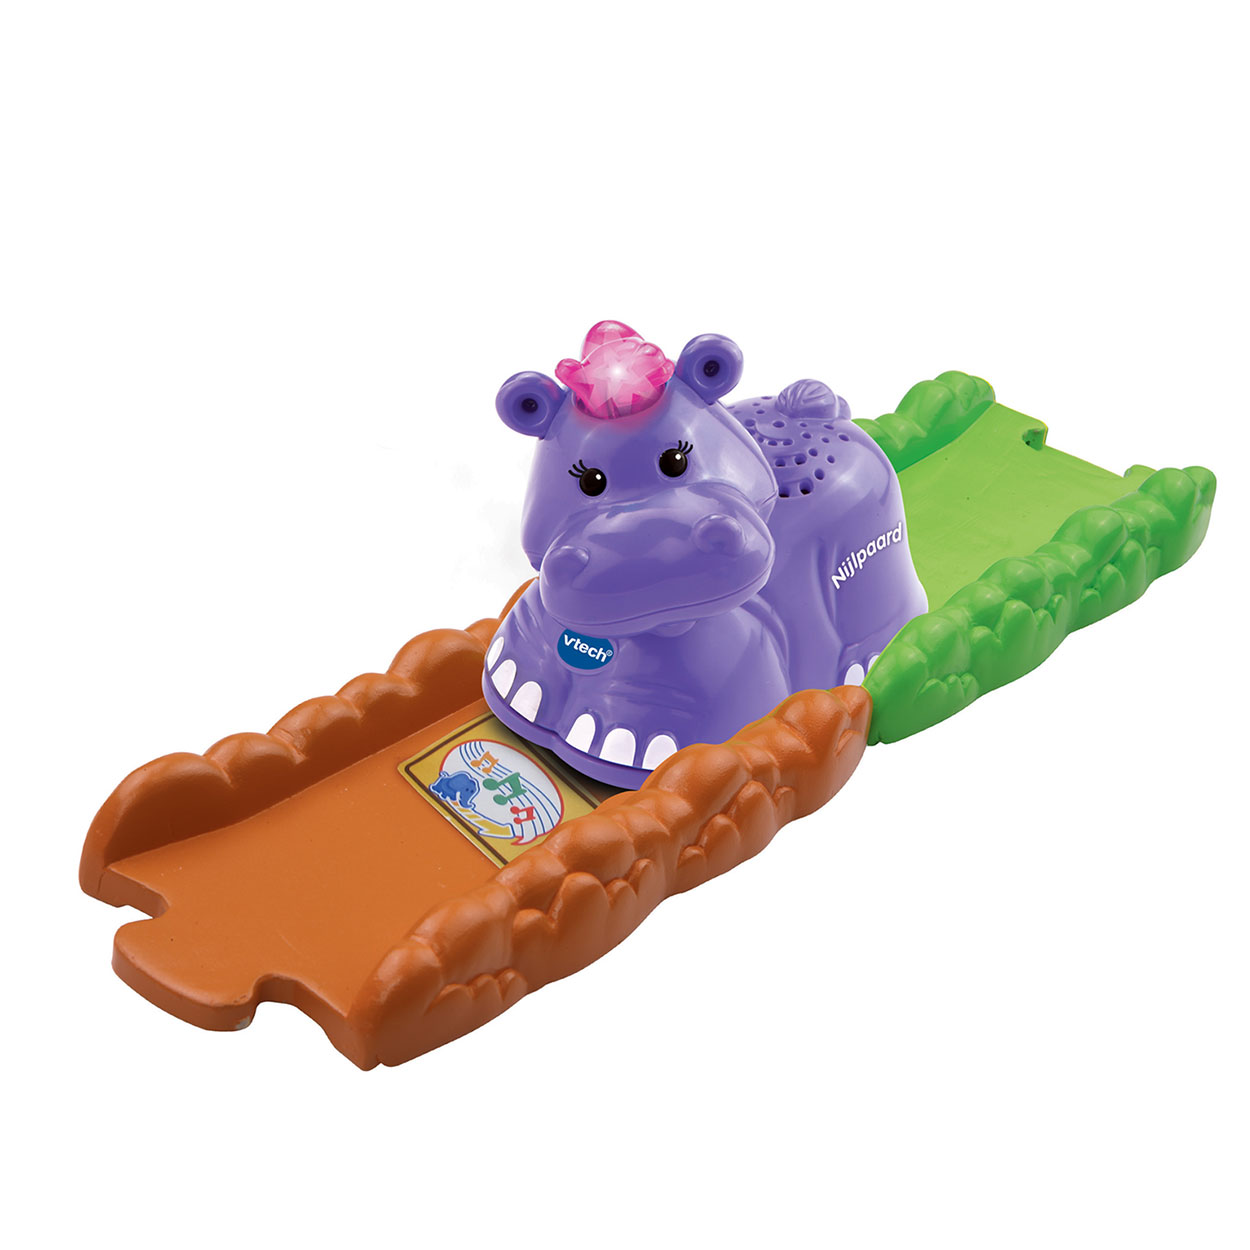 VTech Zoef Zoef Dieren | Thimble Toys